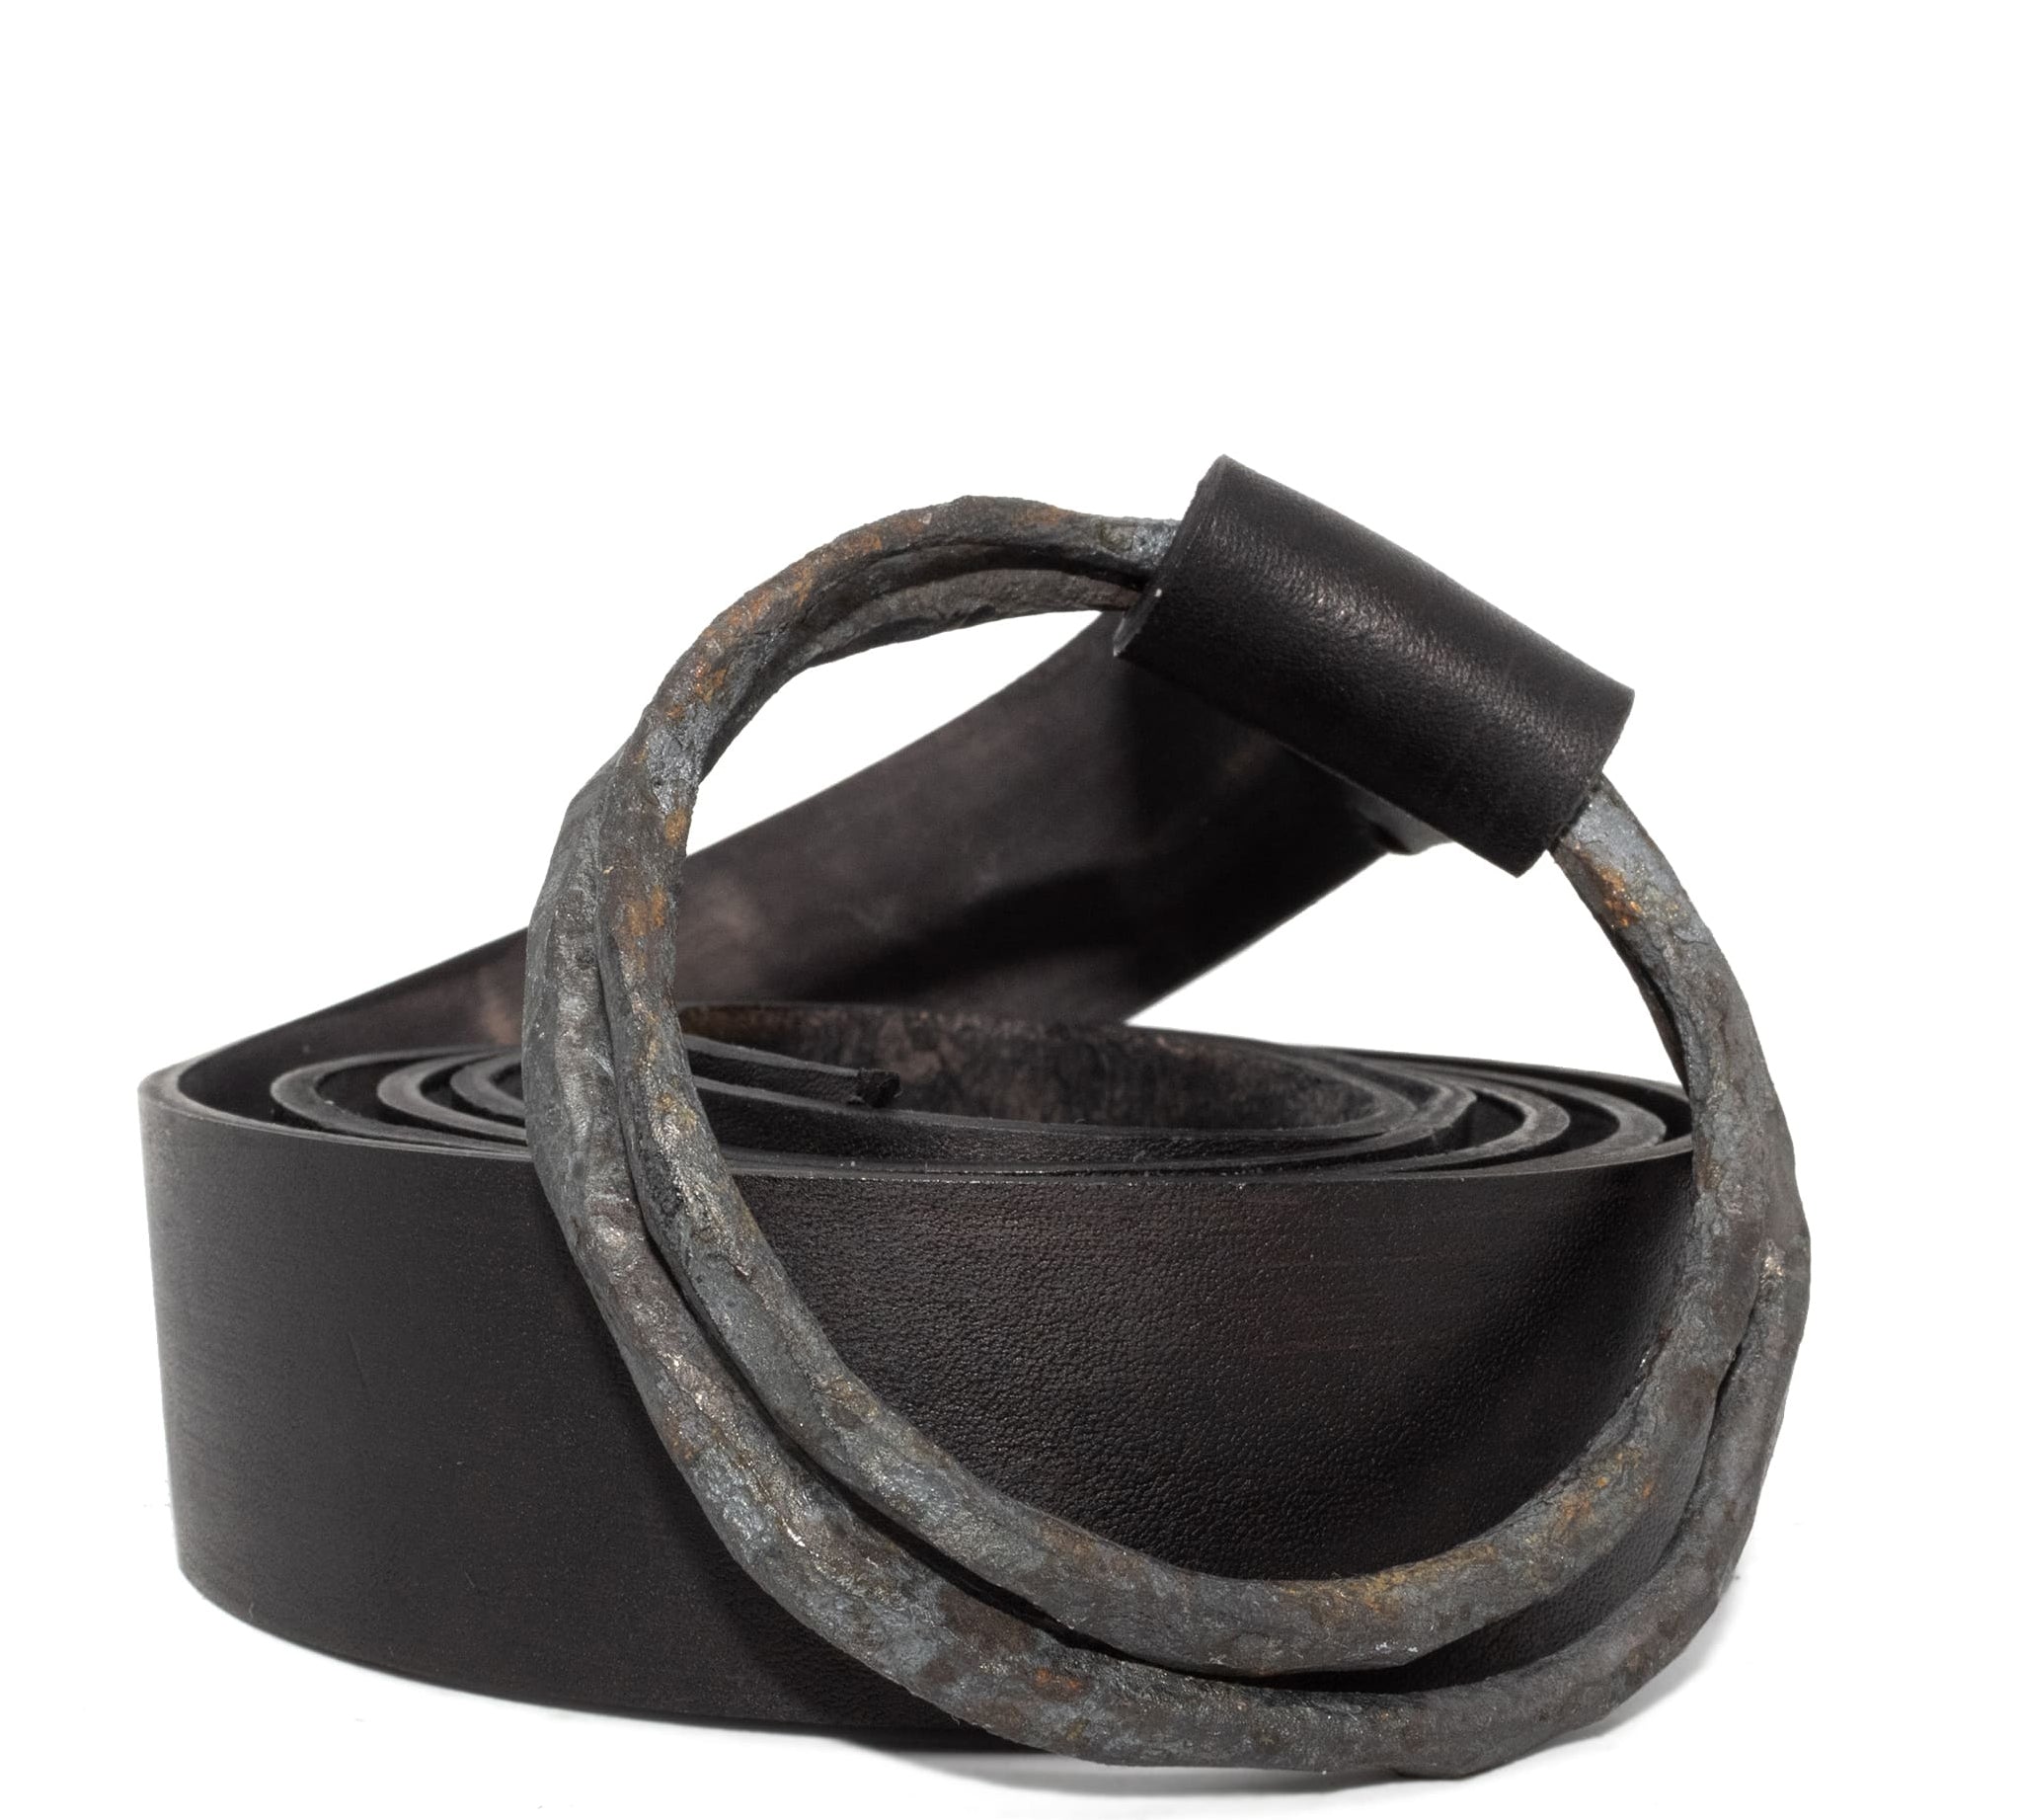 shop and explore handmade Avant Garde leather belts online from atelier skn.